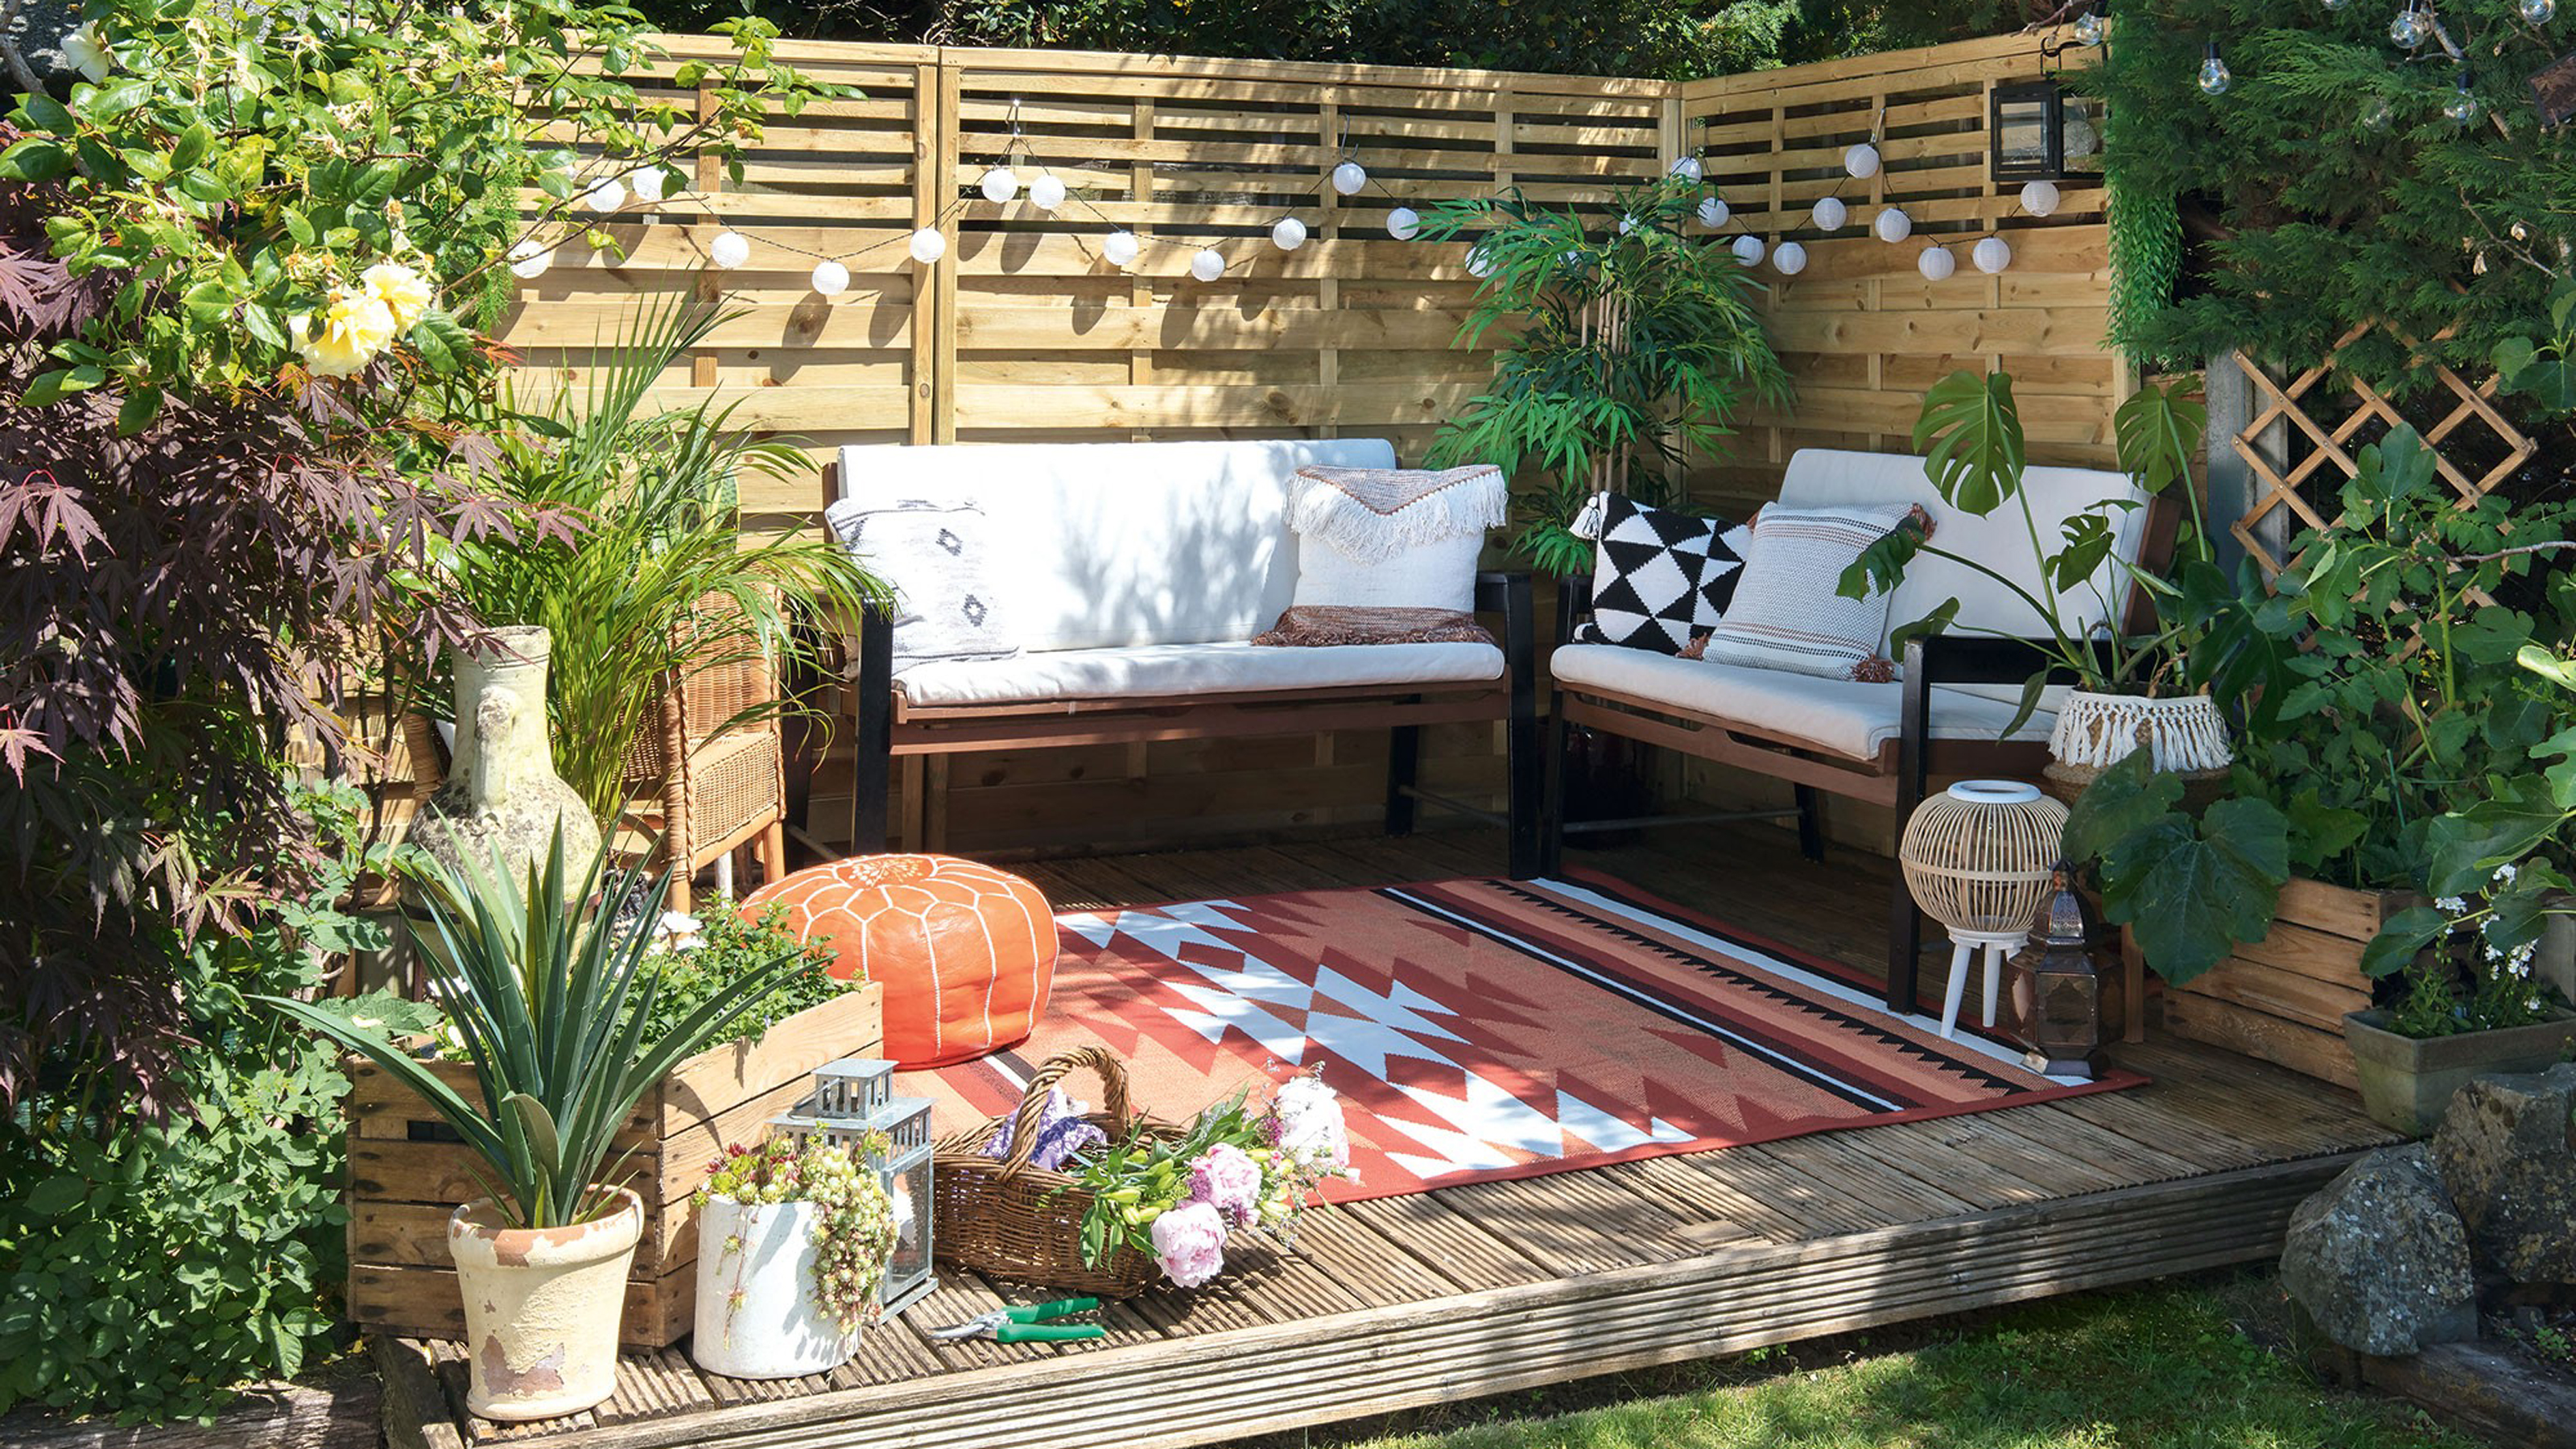 Small garden ideas to make the most of your outdoor space   Ideal Home